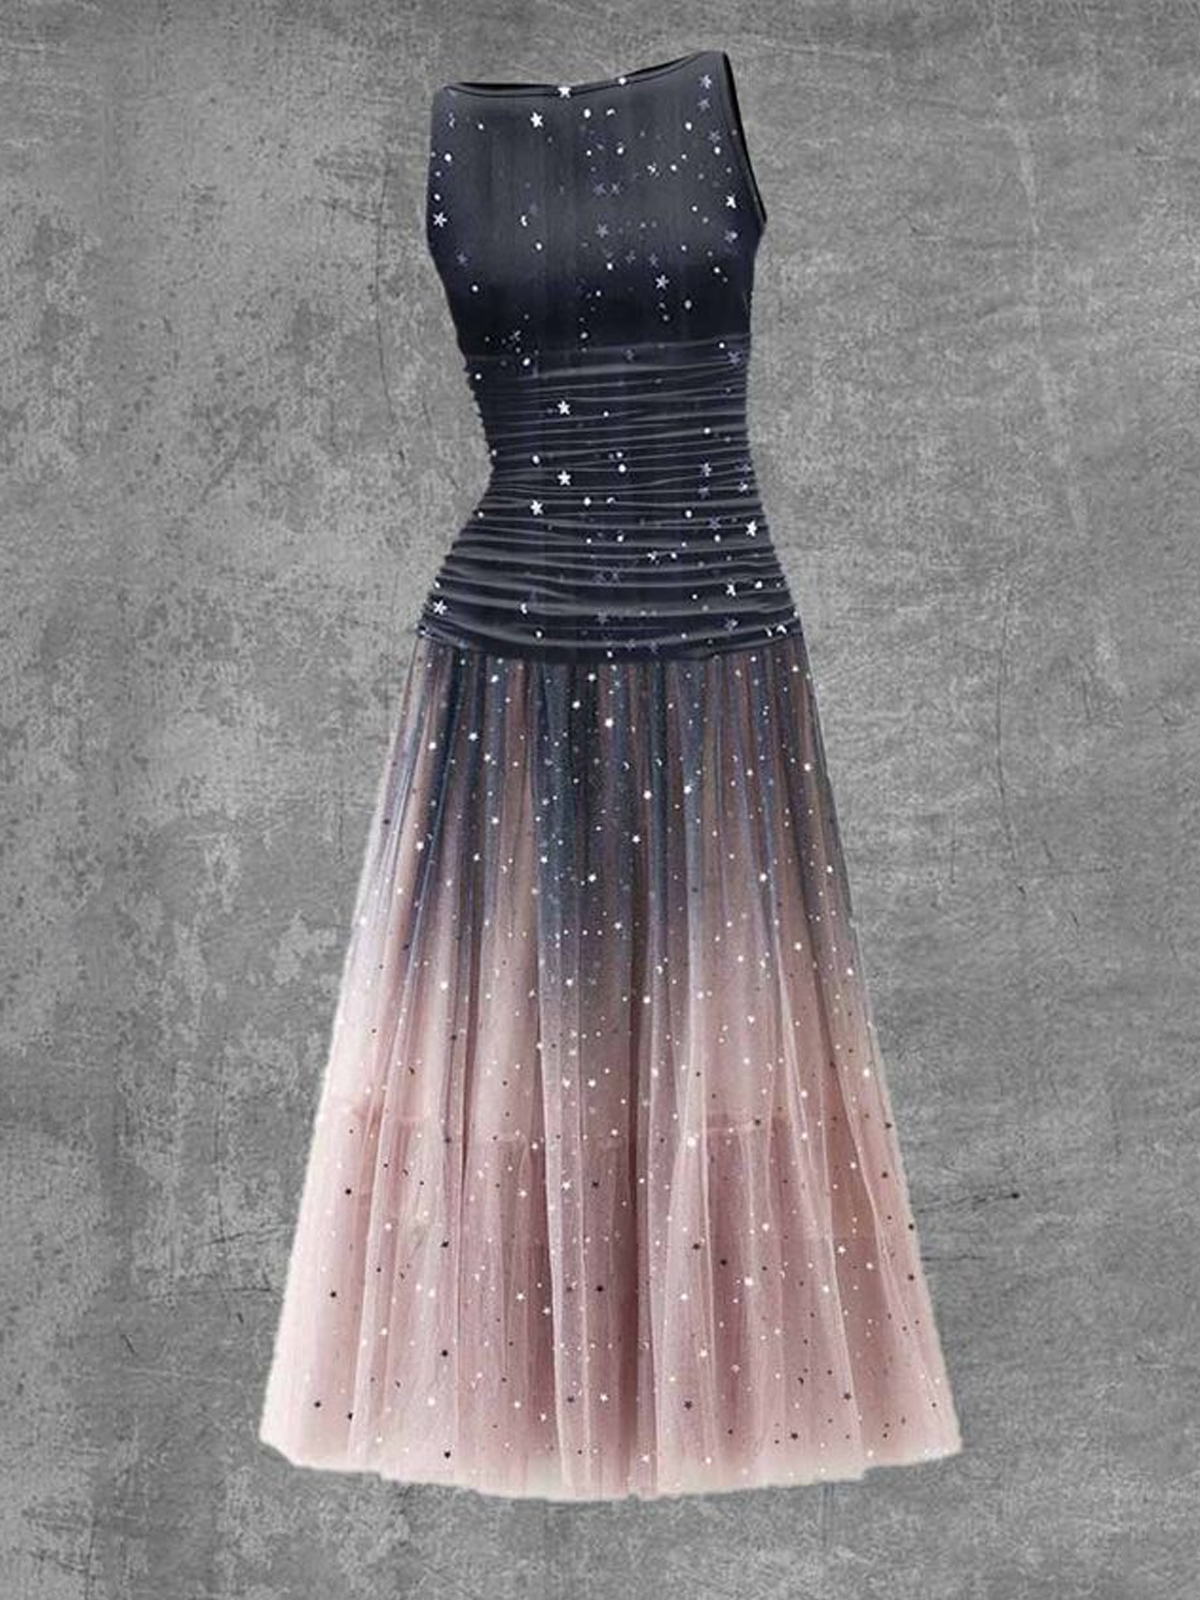 Waisted Evening Gown Sparkling Gown Party Wear Formal Evening Gown Sleeveless Sequined Long Dress T-Shirts& Hoodies,Custom Designs,Diverse Colors,Best Prices